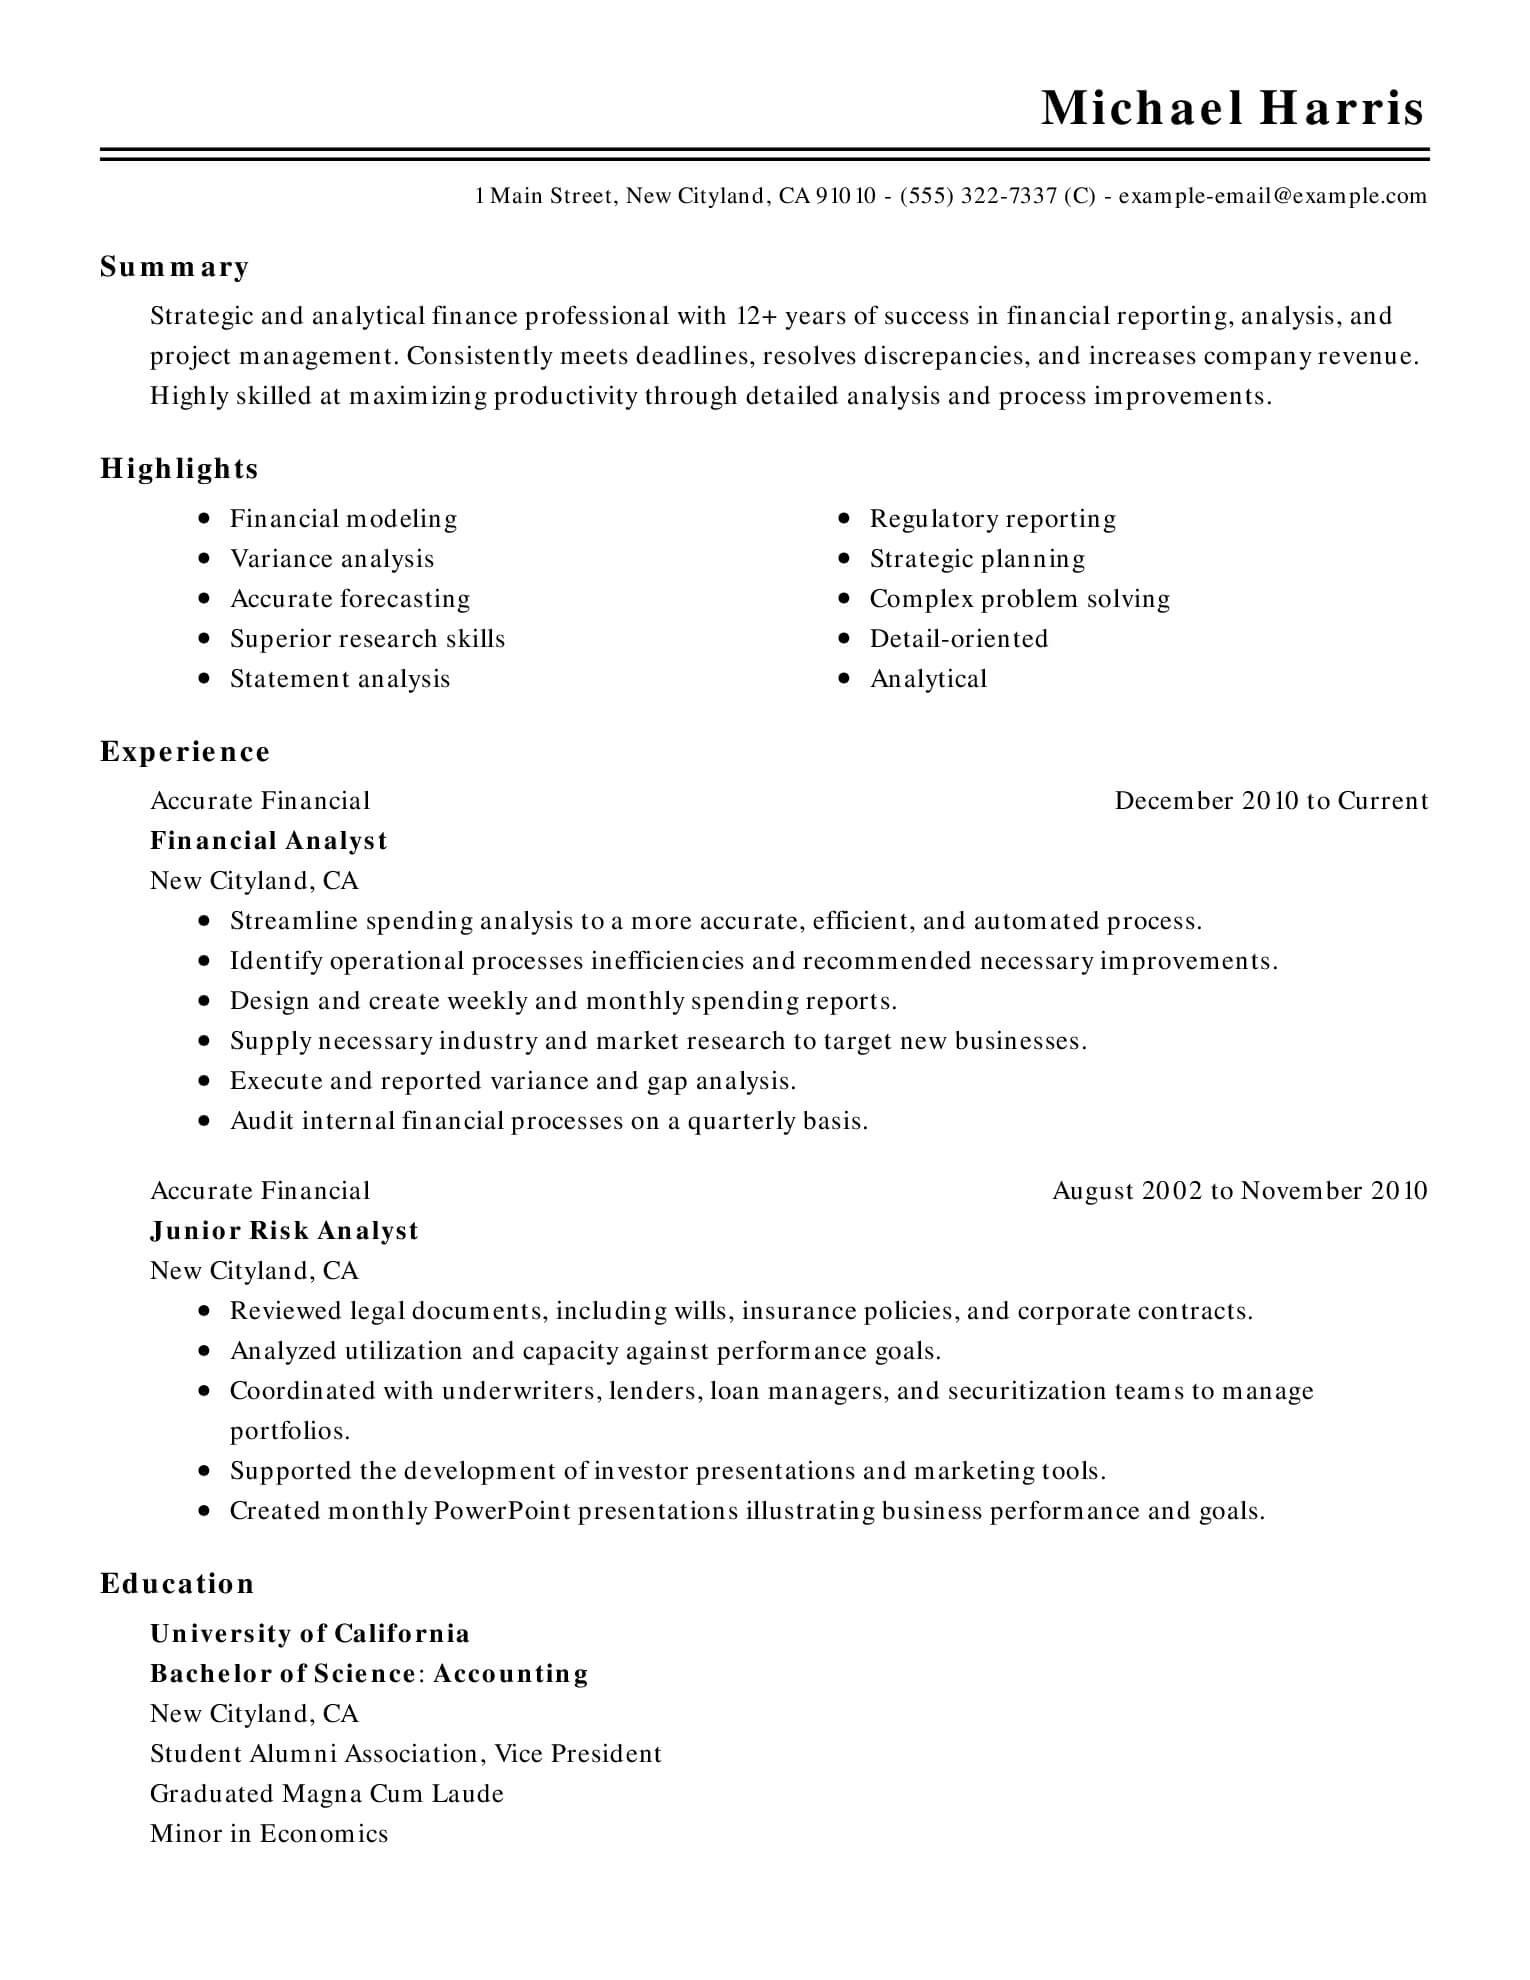 Of The Best Resume Templates For Microsoft Word Office  Livecareer with regard to How To Get A Resume Template On Word